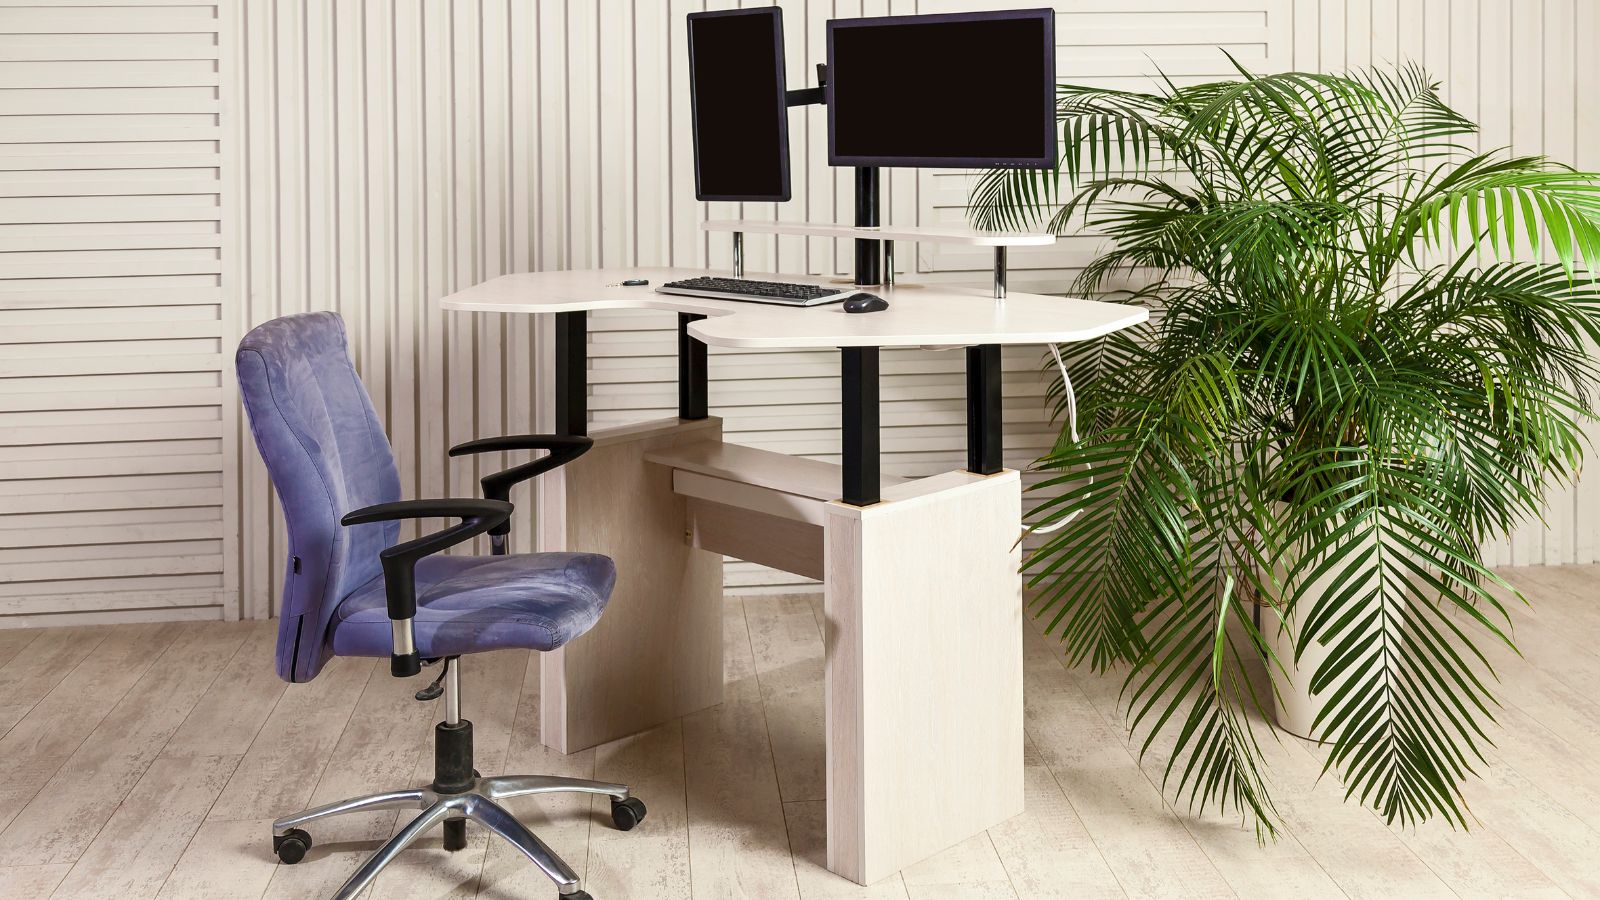 A sit-stand office desk